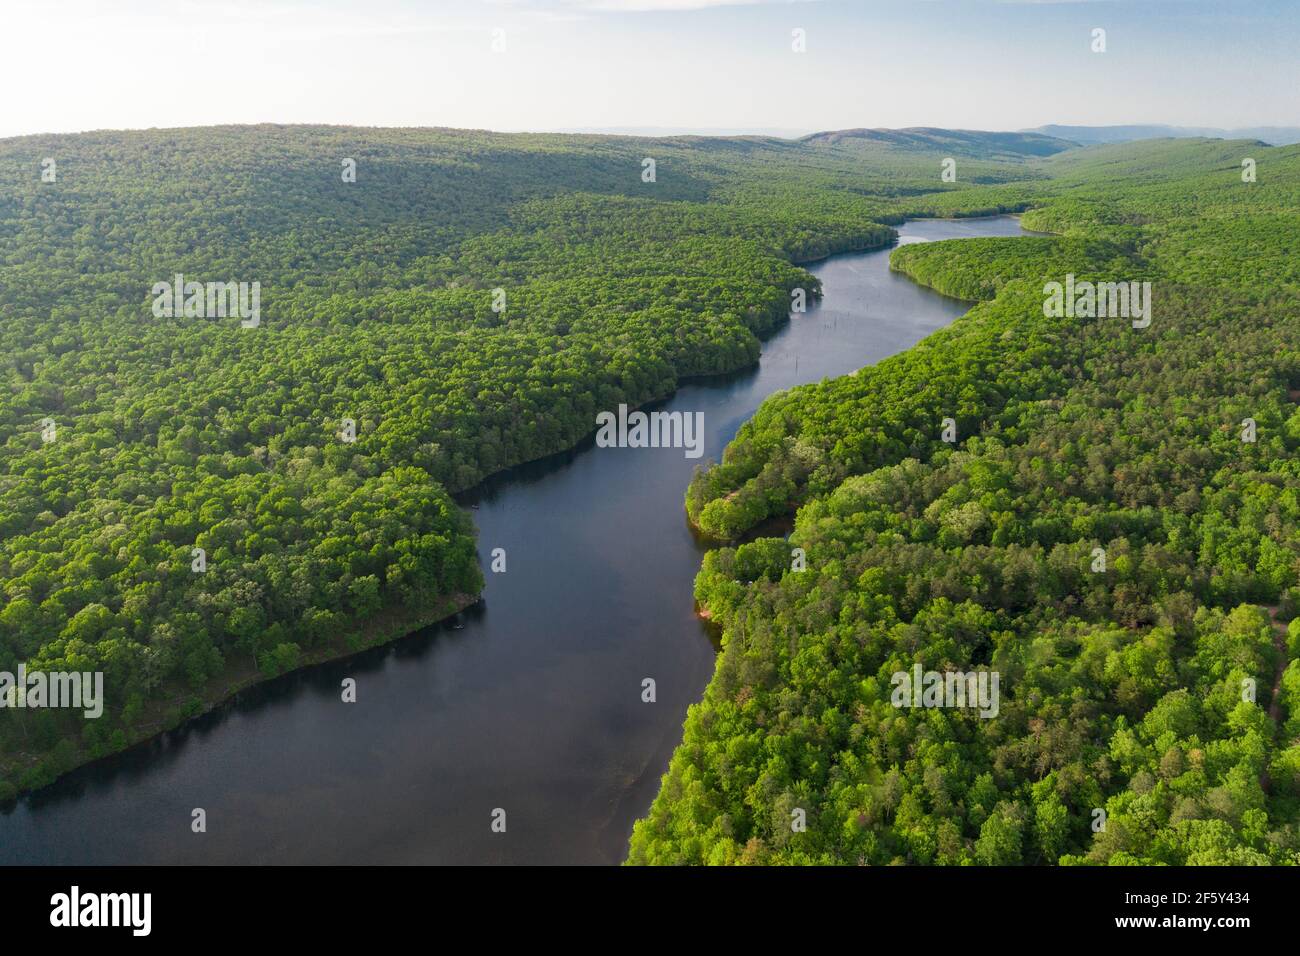 Aerials Over Big Lake in Forest Covered Hills Stock Photo